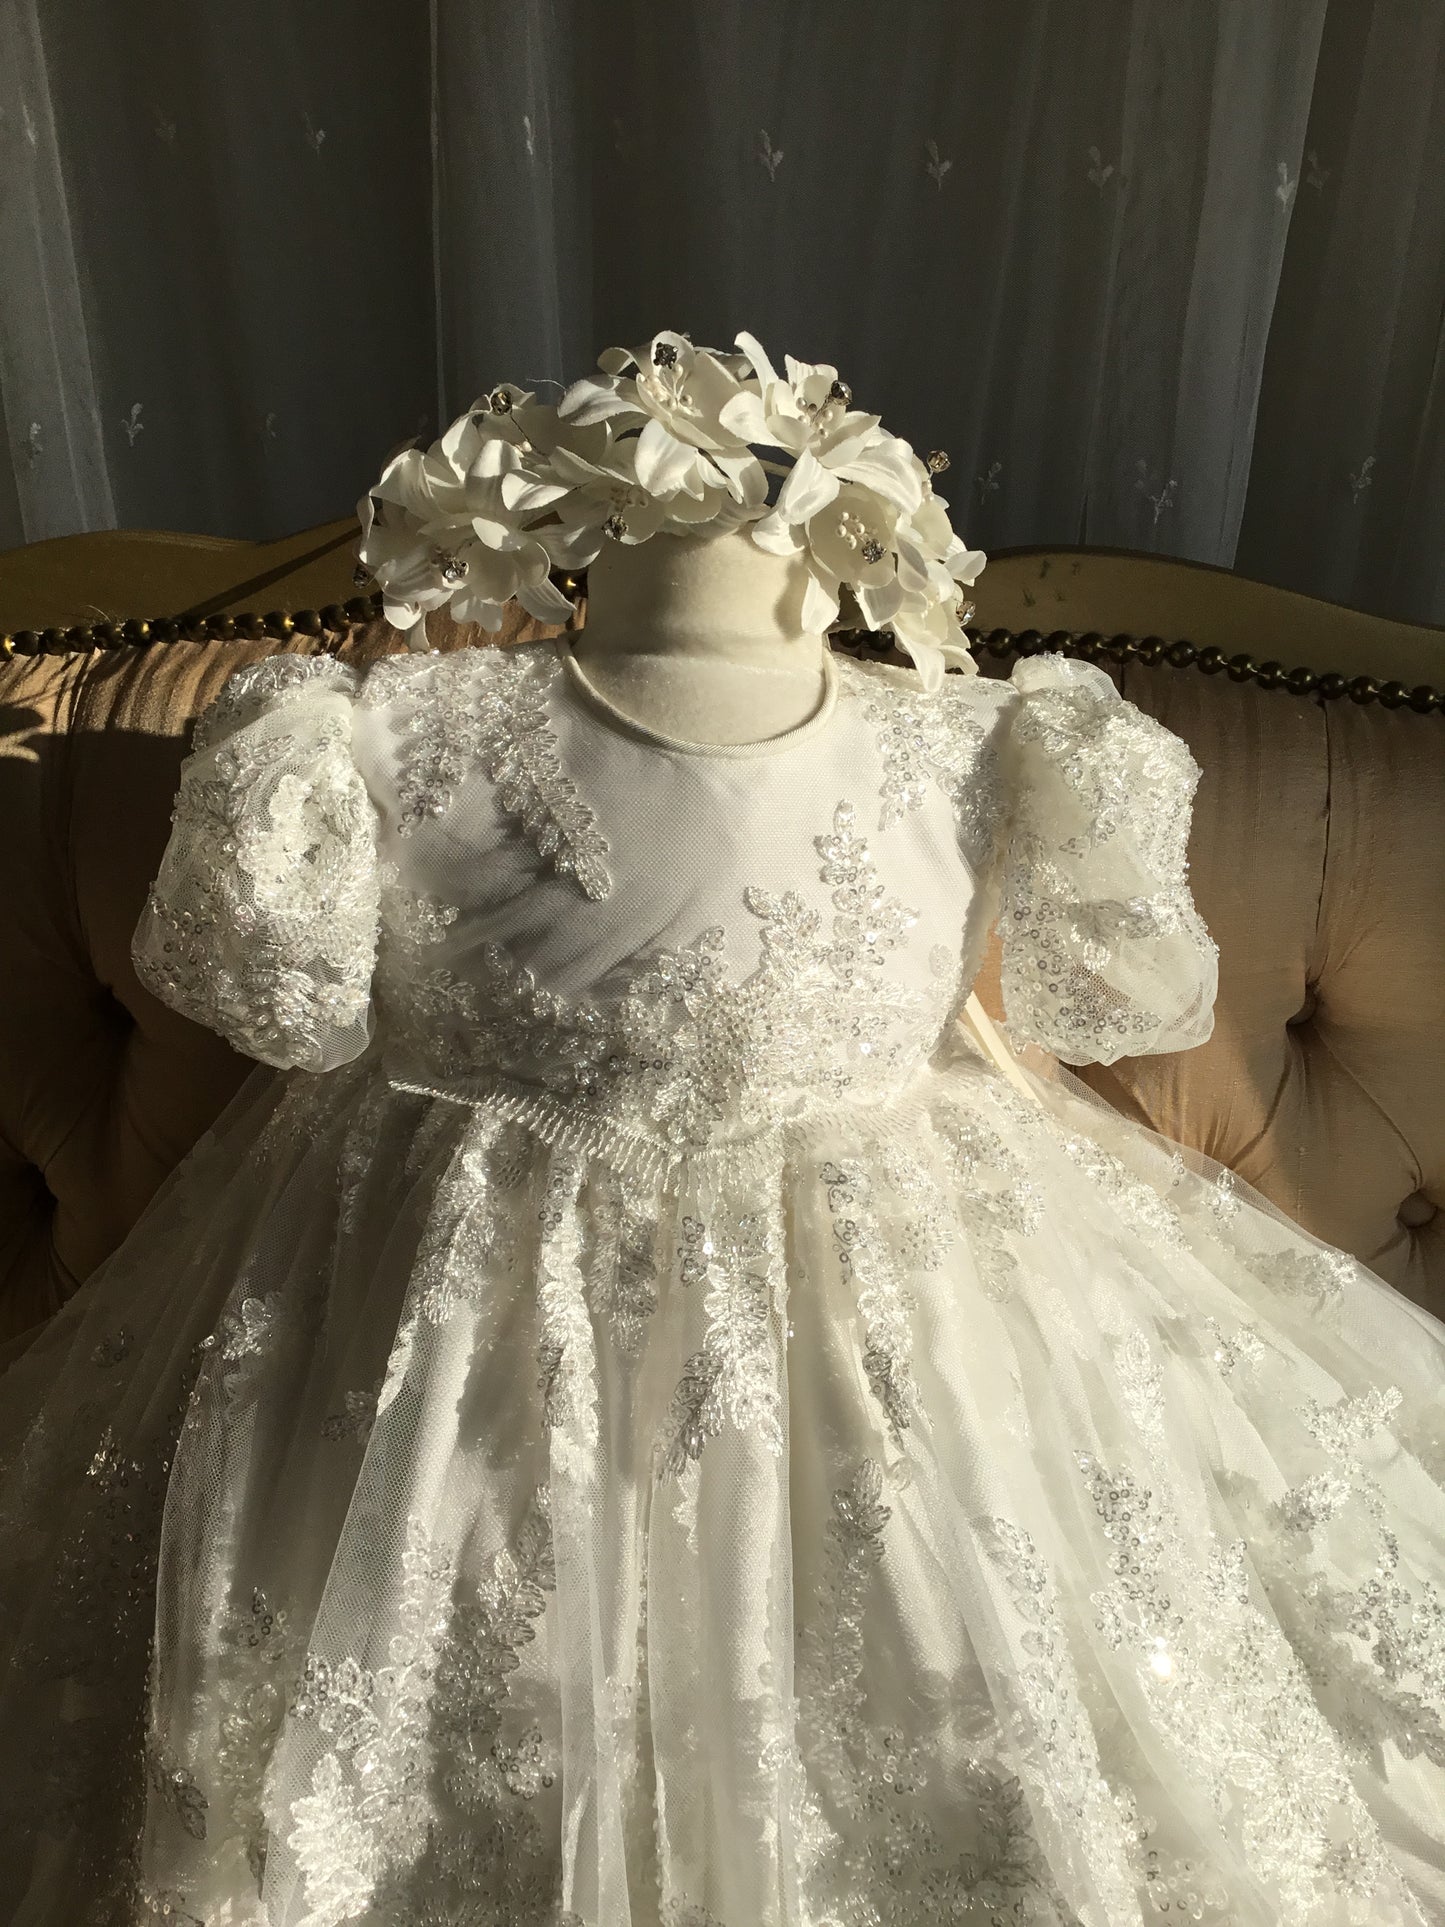 Christening Gown - Amelia